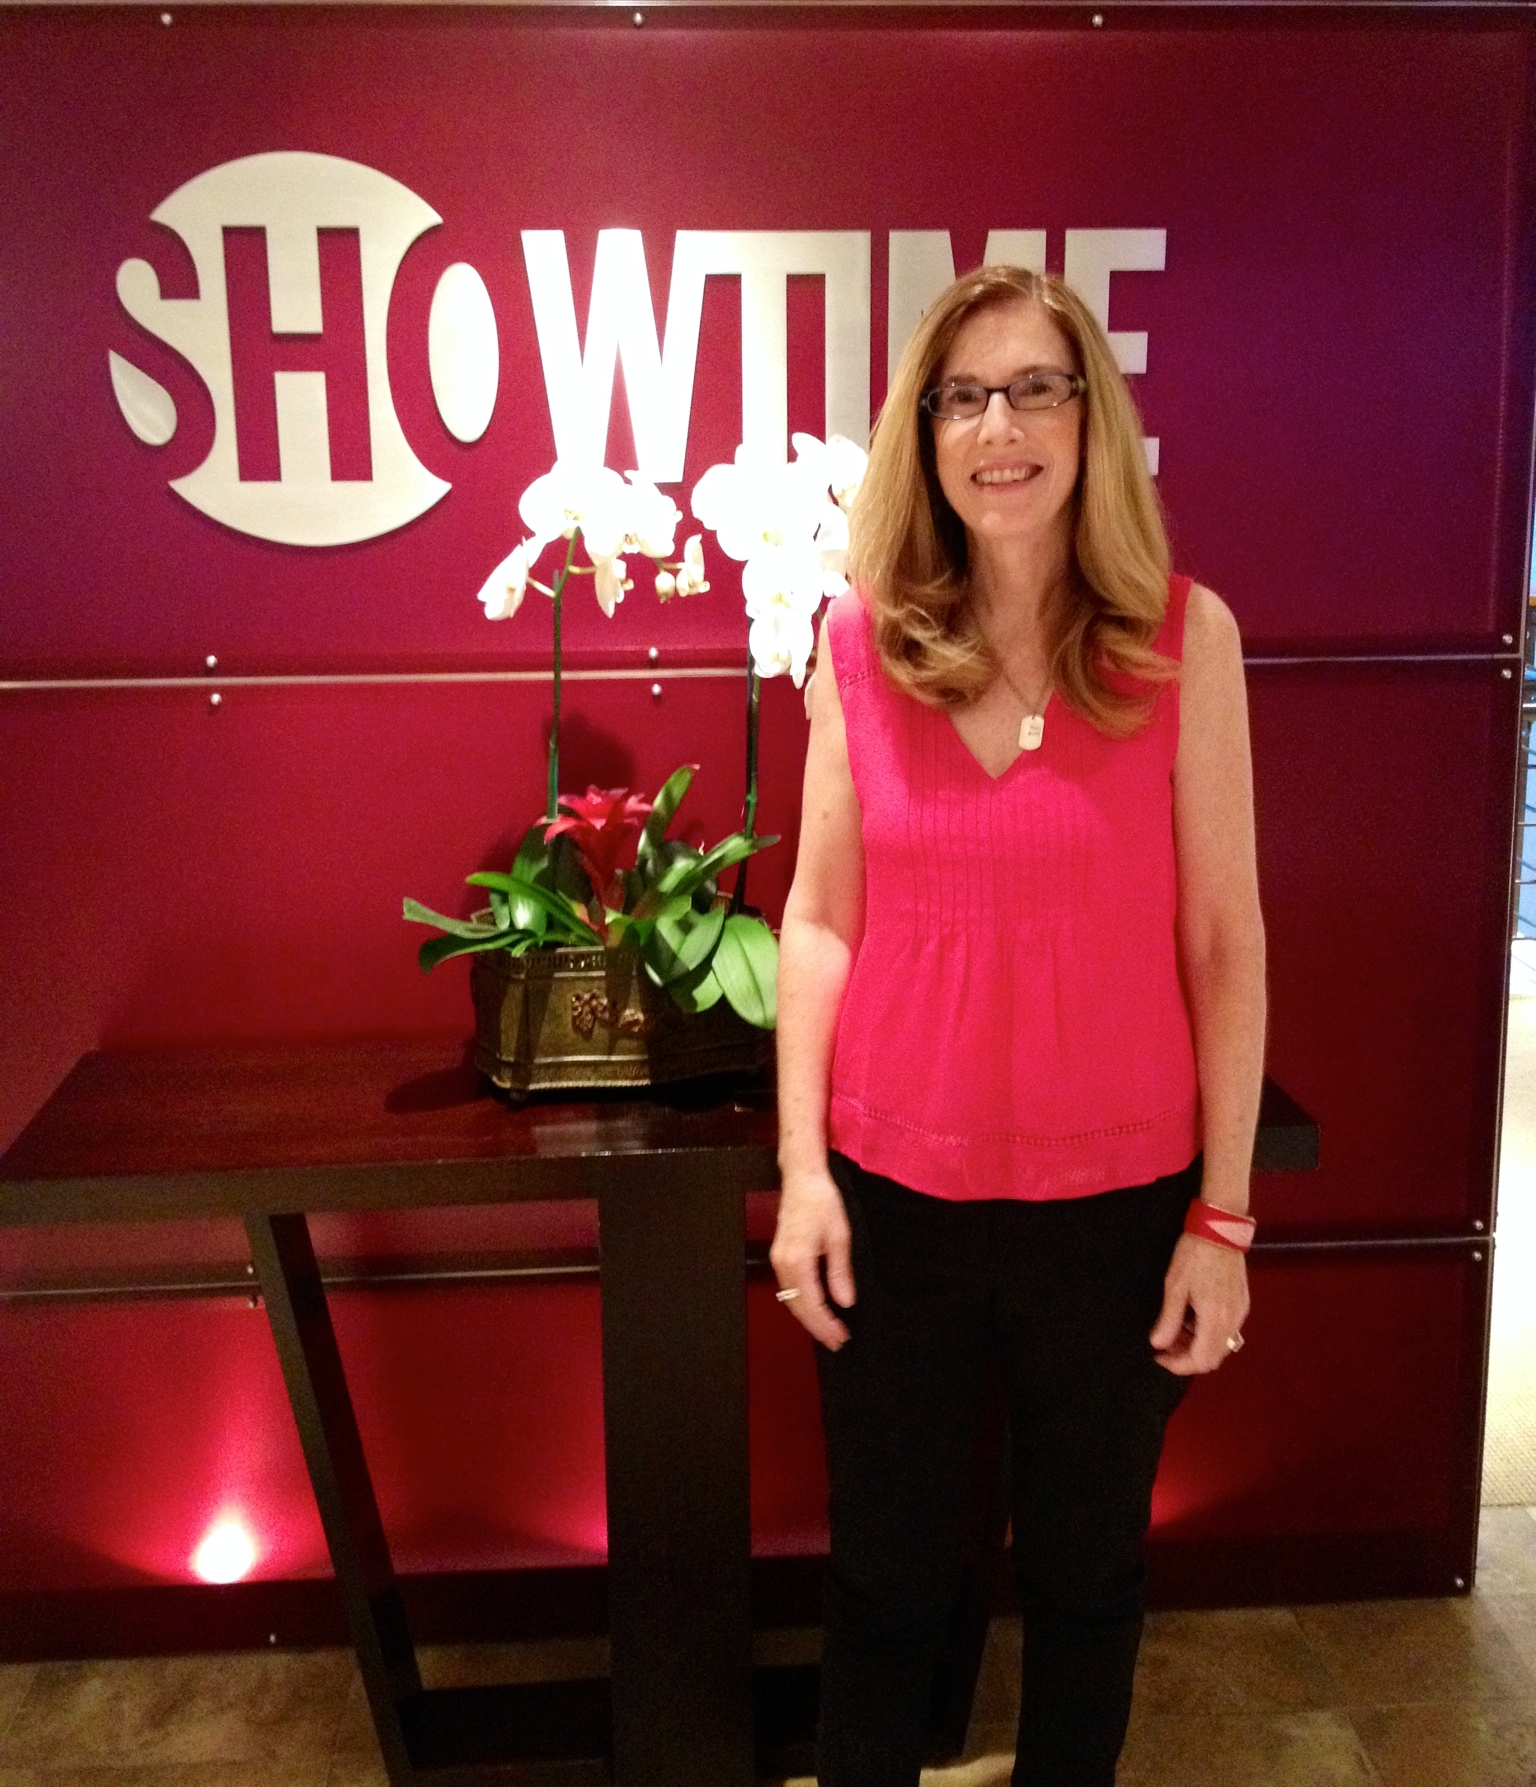 Goody Awards Founder Liz H Kelly honored Years of Living Dangerously at Showtime